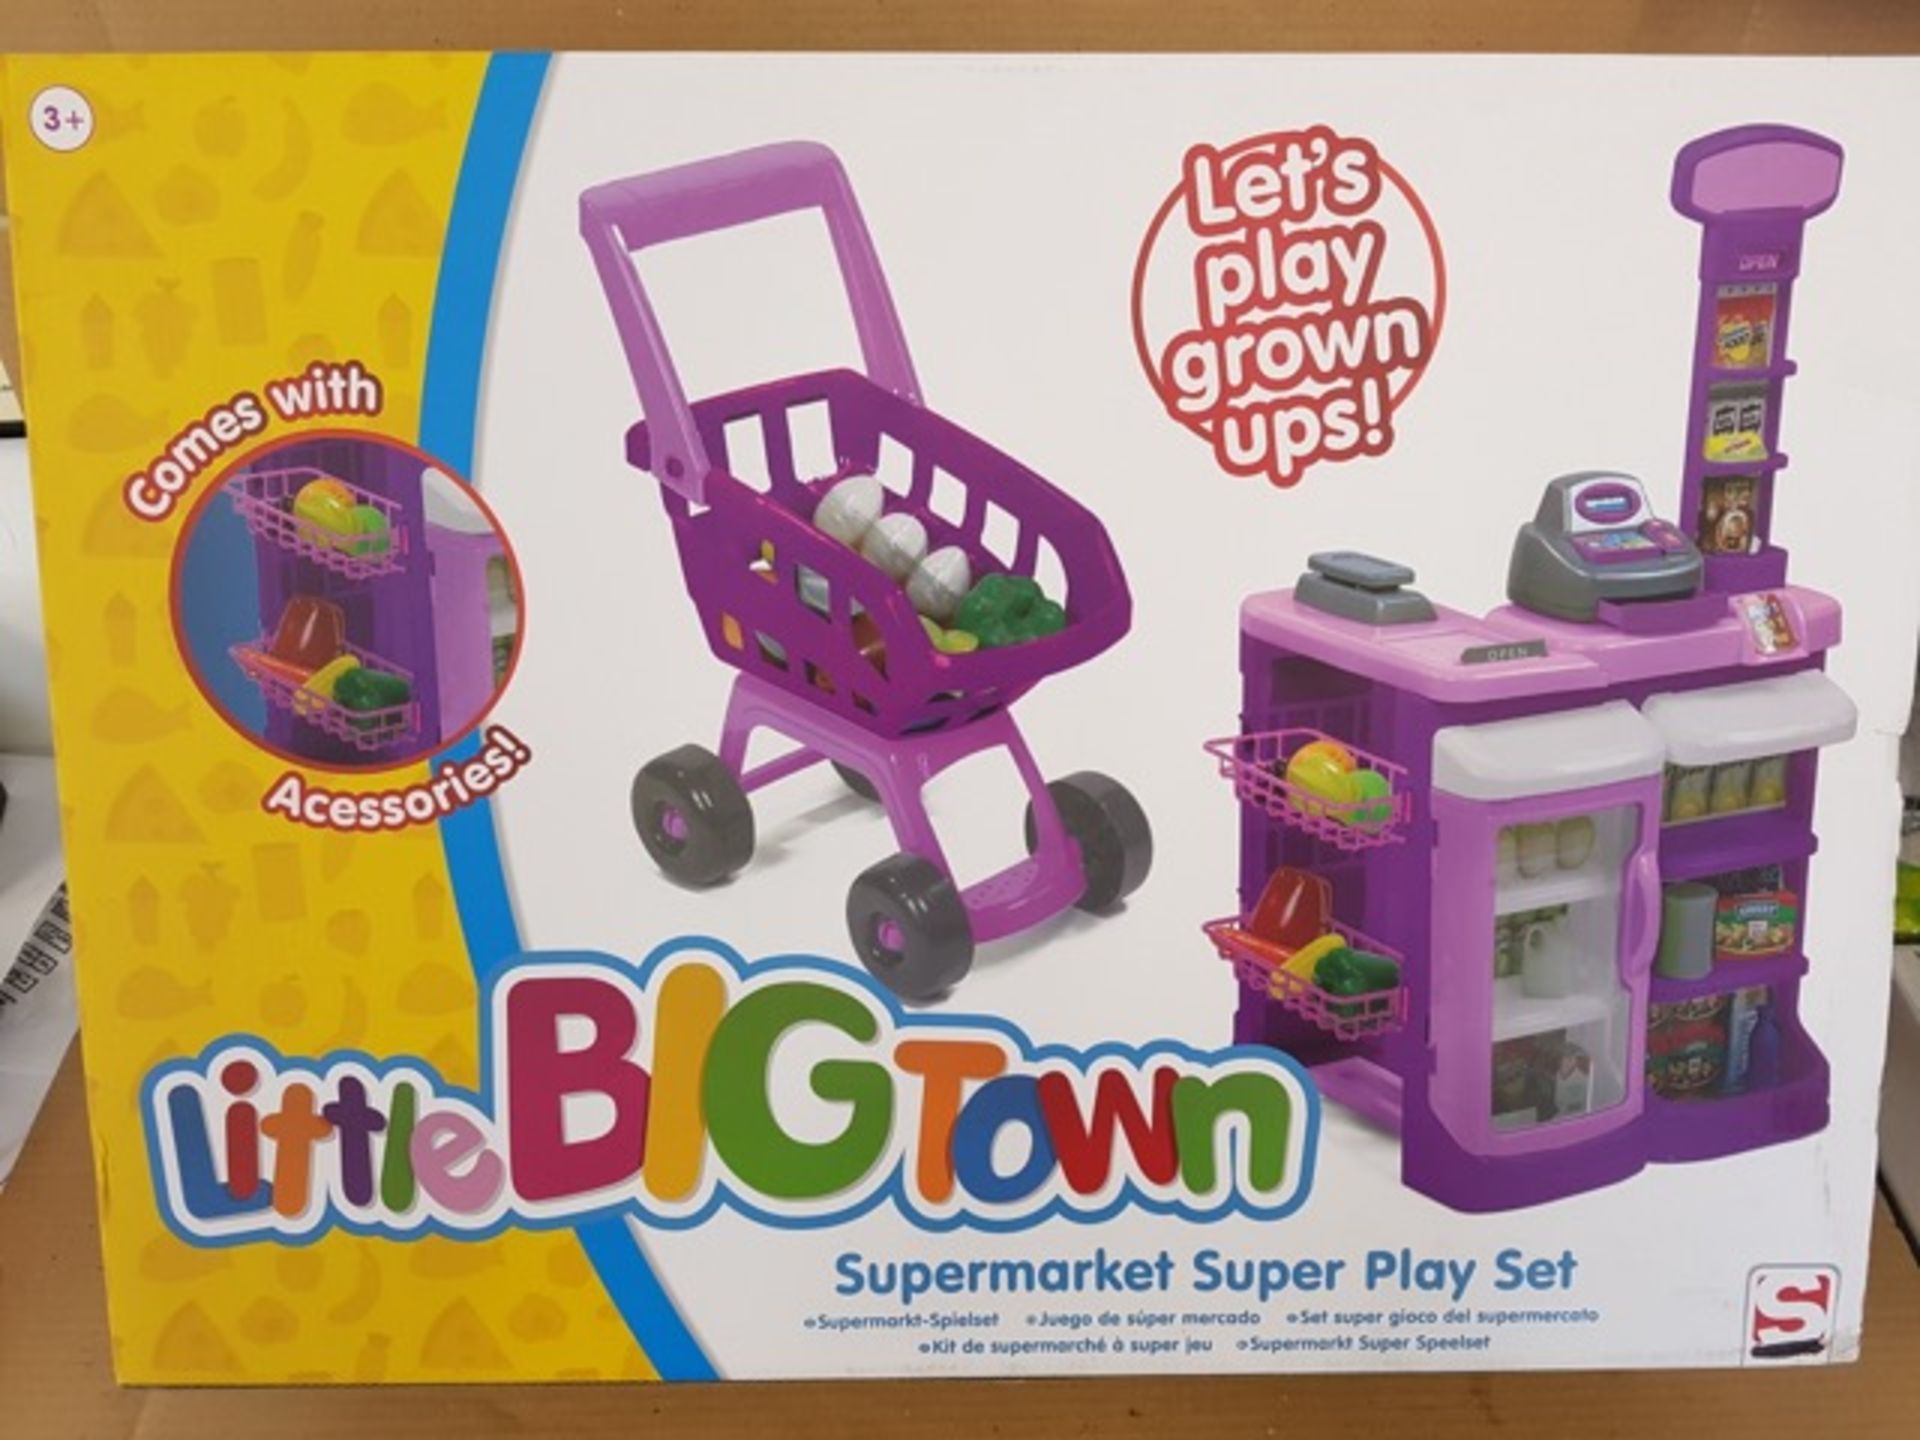 4 x Brand New Little Big Town Extra Large Supermarket Super Play Set's - RRP £99.99 each. Comes with